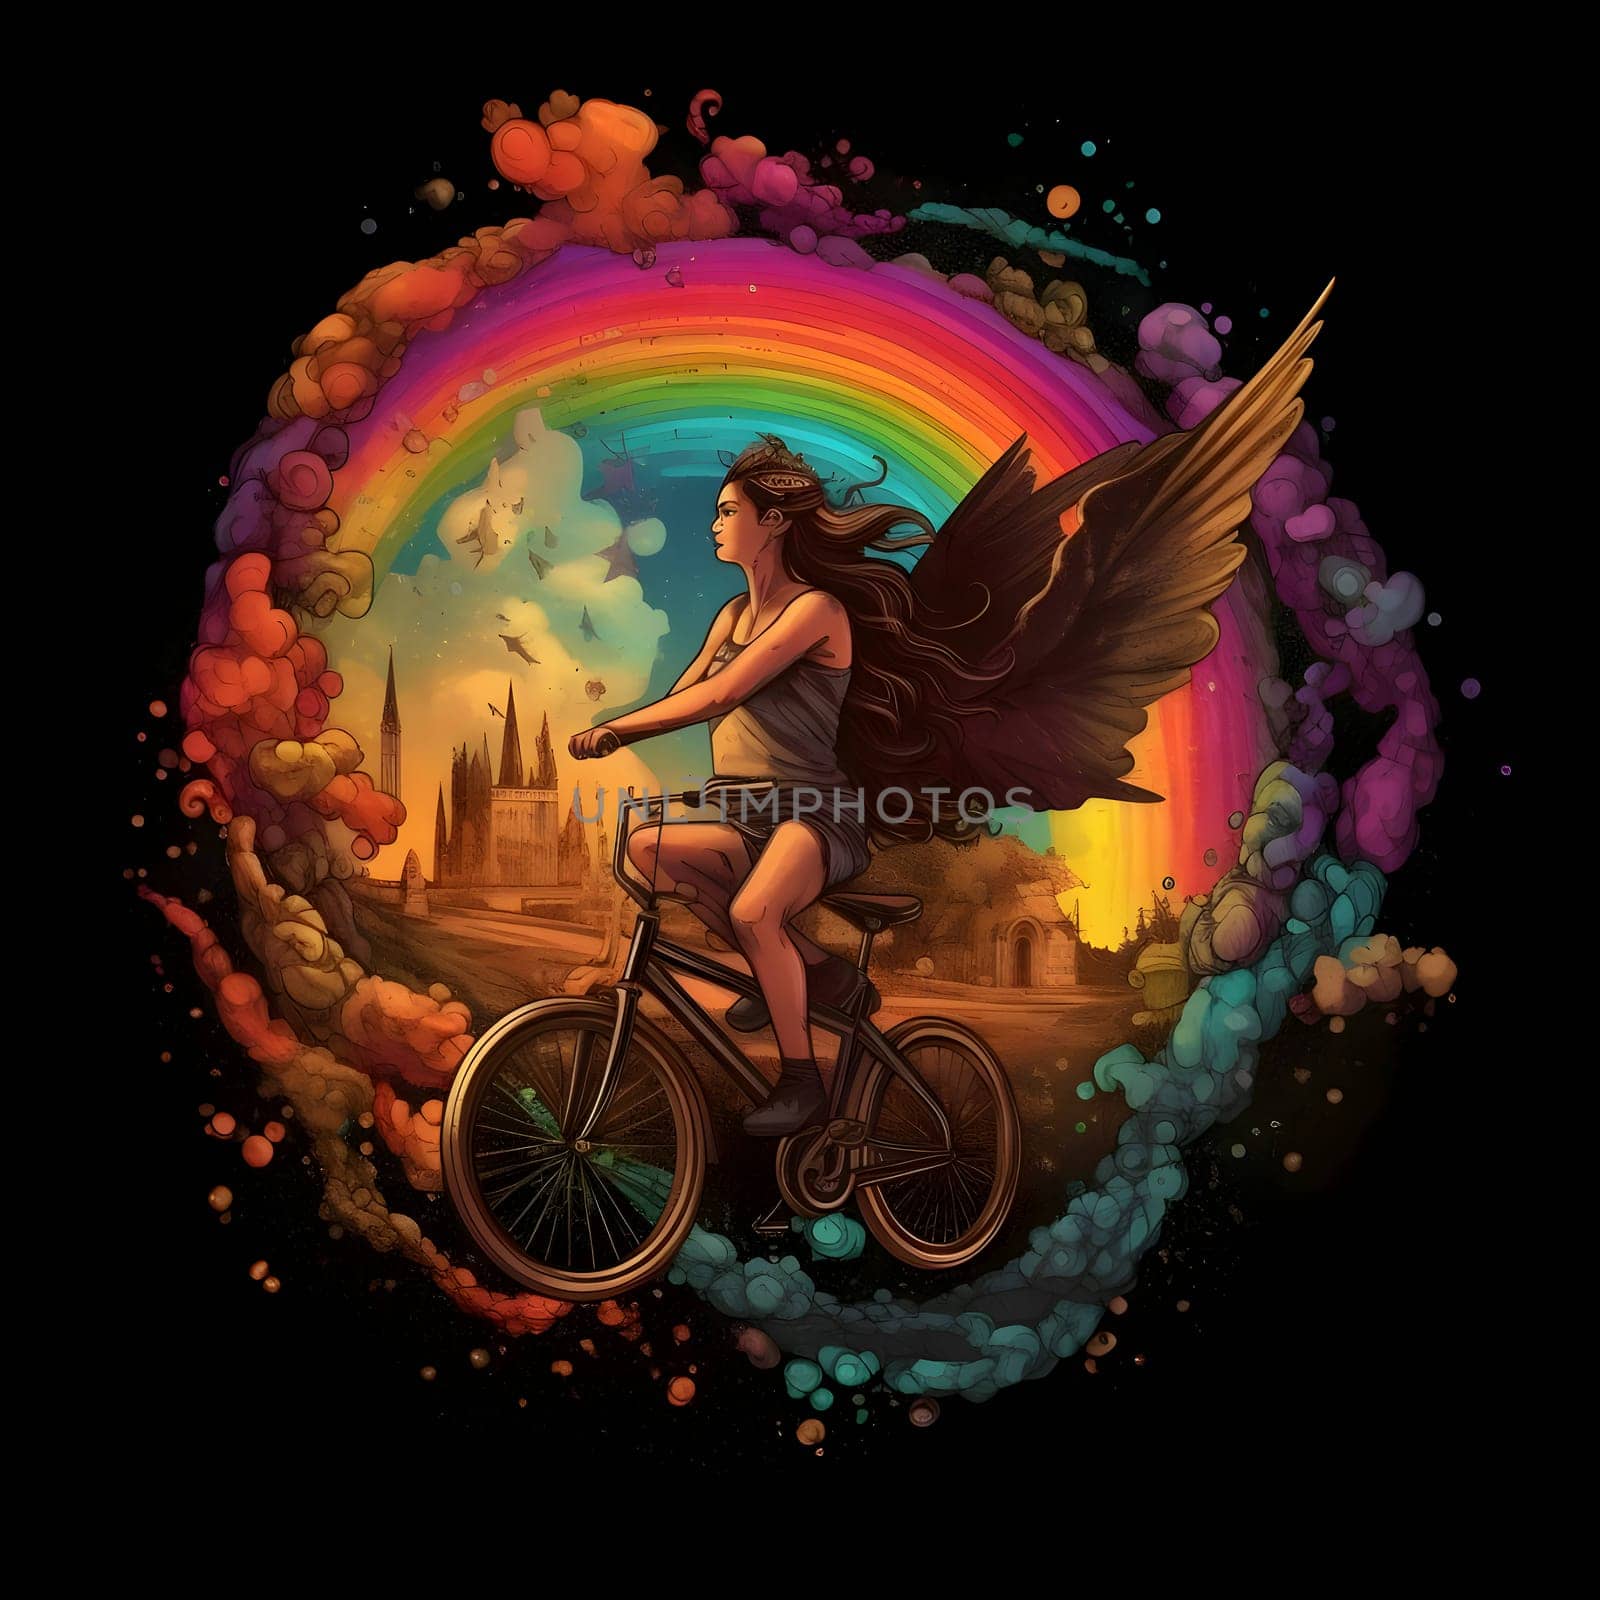 Logo illustration of a girl with wings riding a bicycle with a rainbow in the background. The design features a black background for contrast.